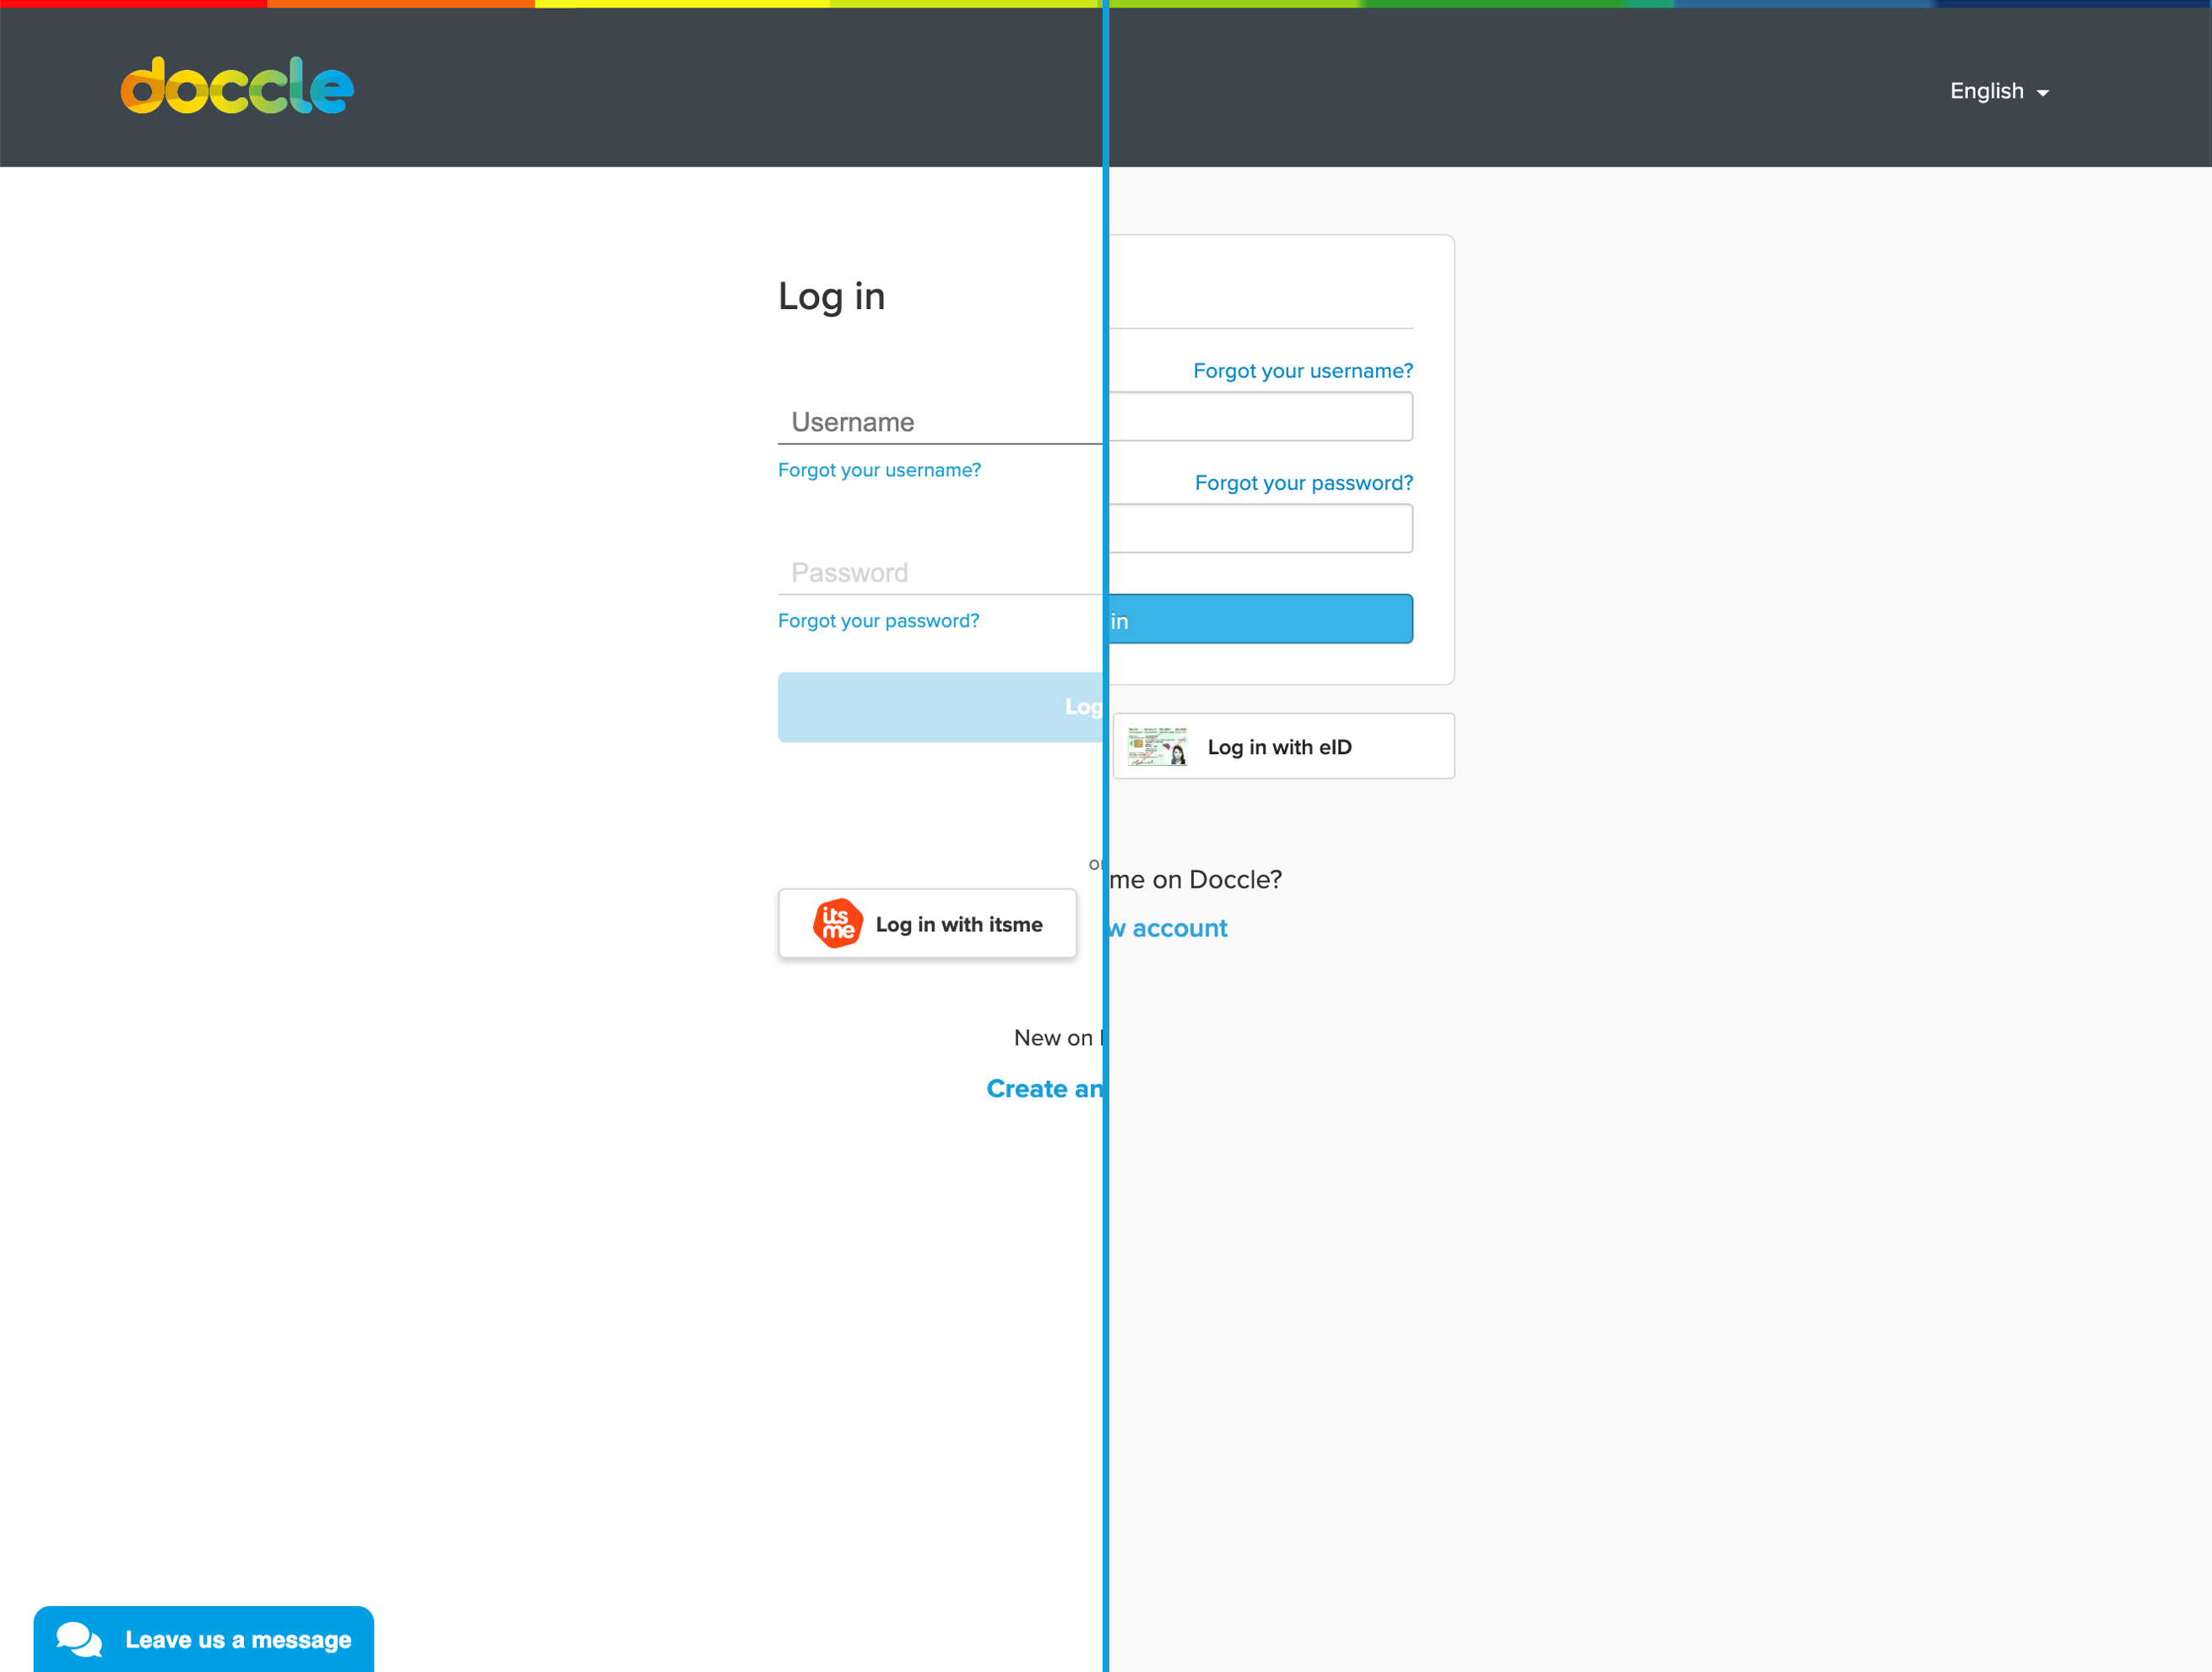 image split in two vertically. Left side shows the current log in page and the right side shows the previous version.